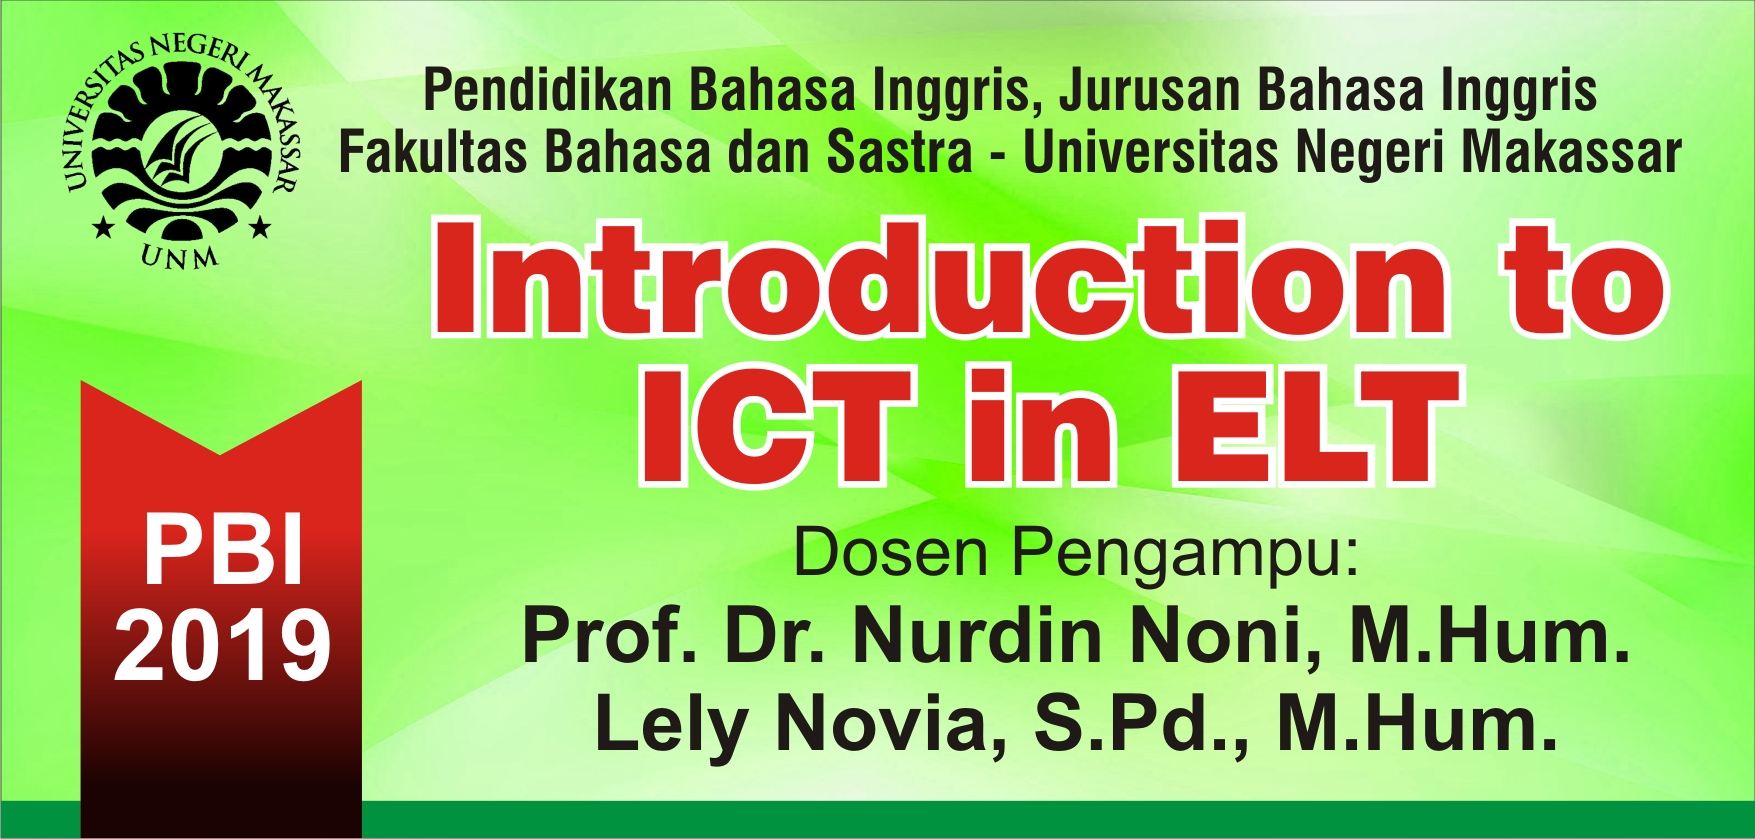 20201-INTRODUCTION TO ICT IN ELT